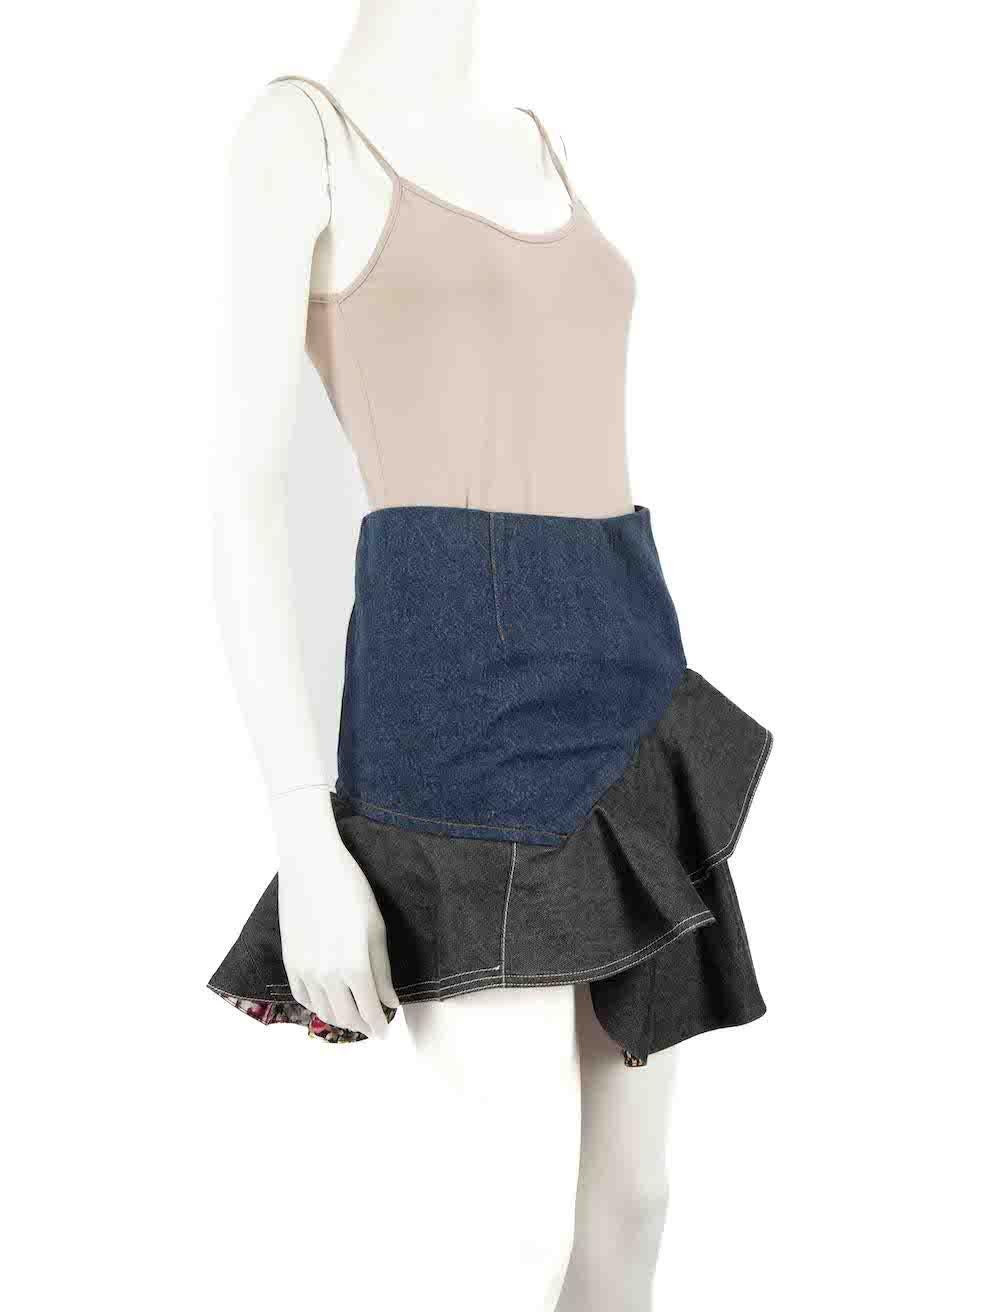 CONDITION is Very good. Hardly any visible wear to skirt is evident on this used Alexander McQueen designer resale item.
 
 Details
 Two tone- blue and black
 Denim
 Skirt
 Mini
 Ruffle hem
 Back zip and hook fastening
 
 
 Made in Italy
 
